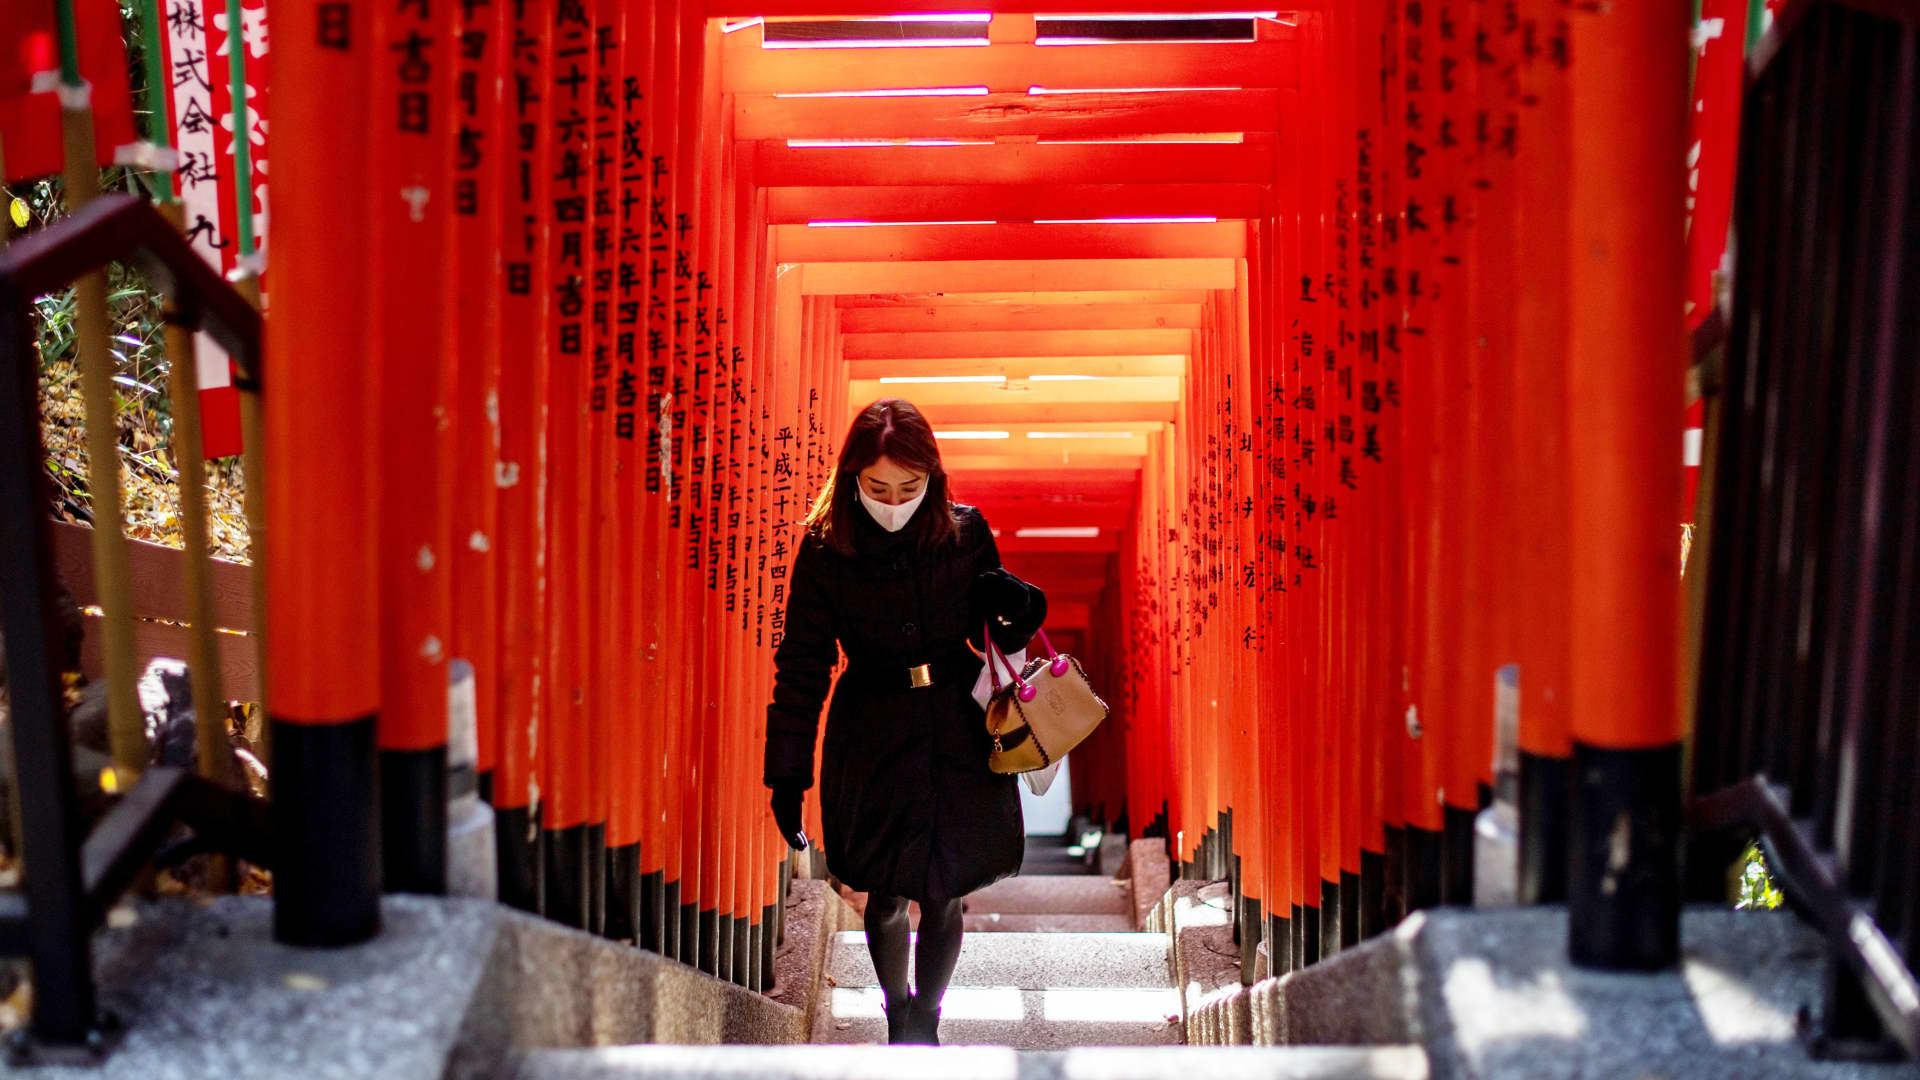 A woman wearing a face mask walks under a row of gates at Hie Shrine in Tokyo on January 7, 2021.